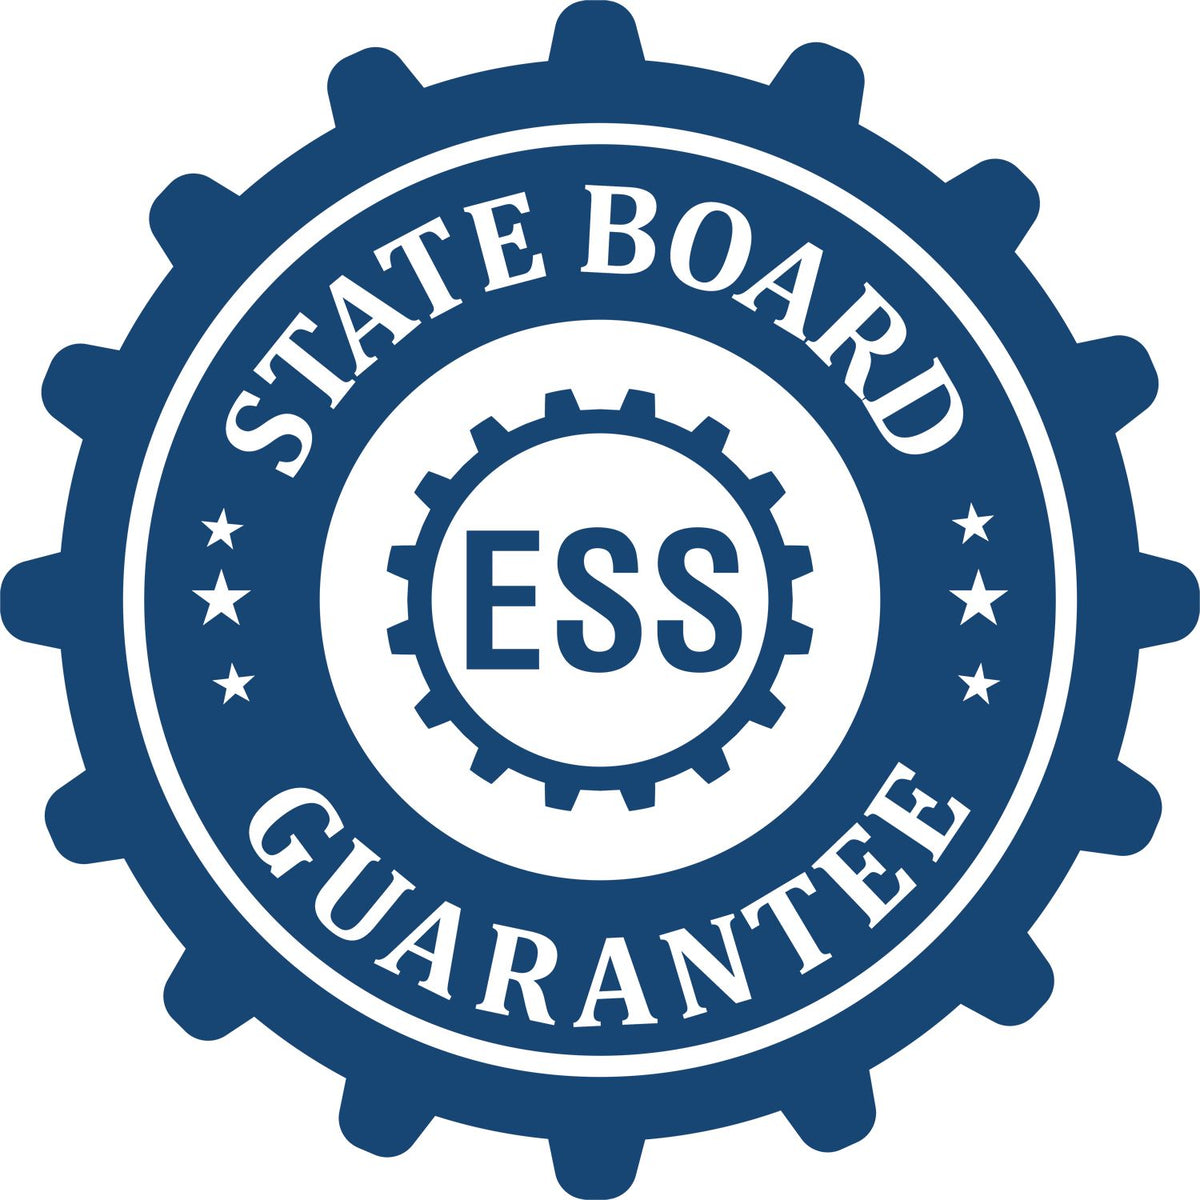 An emblem in a gear shape illustrating a state board guarantee for the Premium MaxLight Pre-Inked New Hampshire Engineering Stamp product.